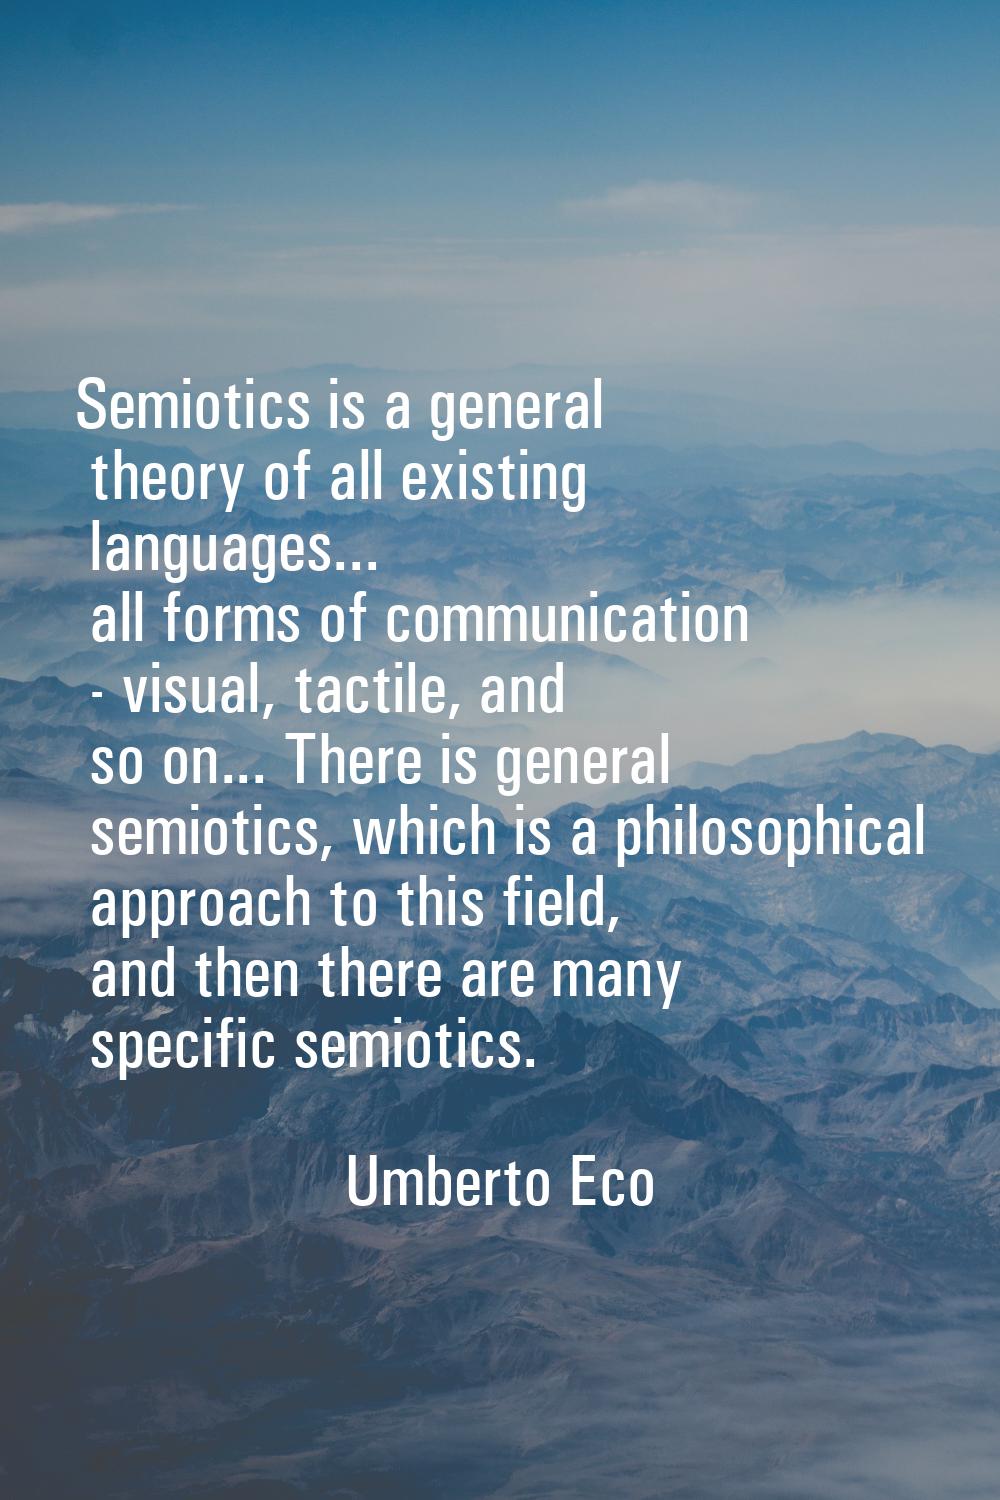 Semiotics is a general theory of all existing languages... all forms of communication - visual, tac